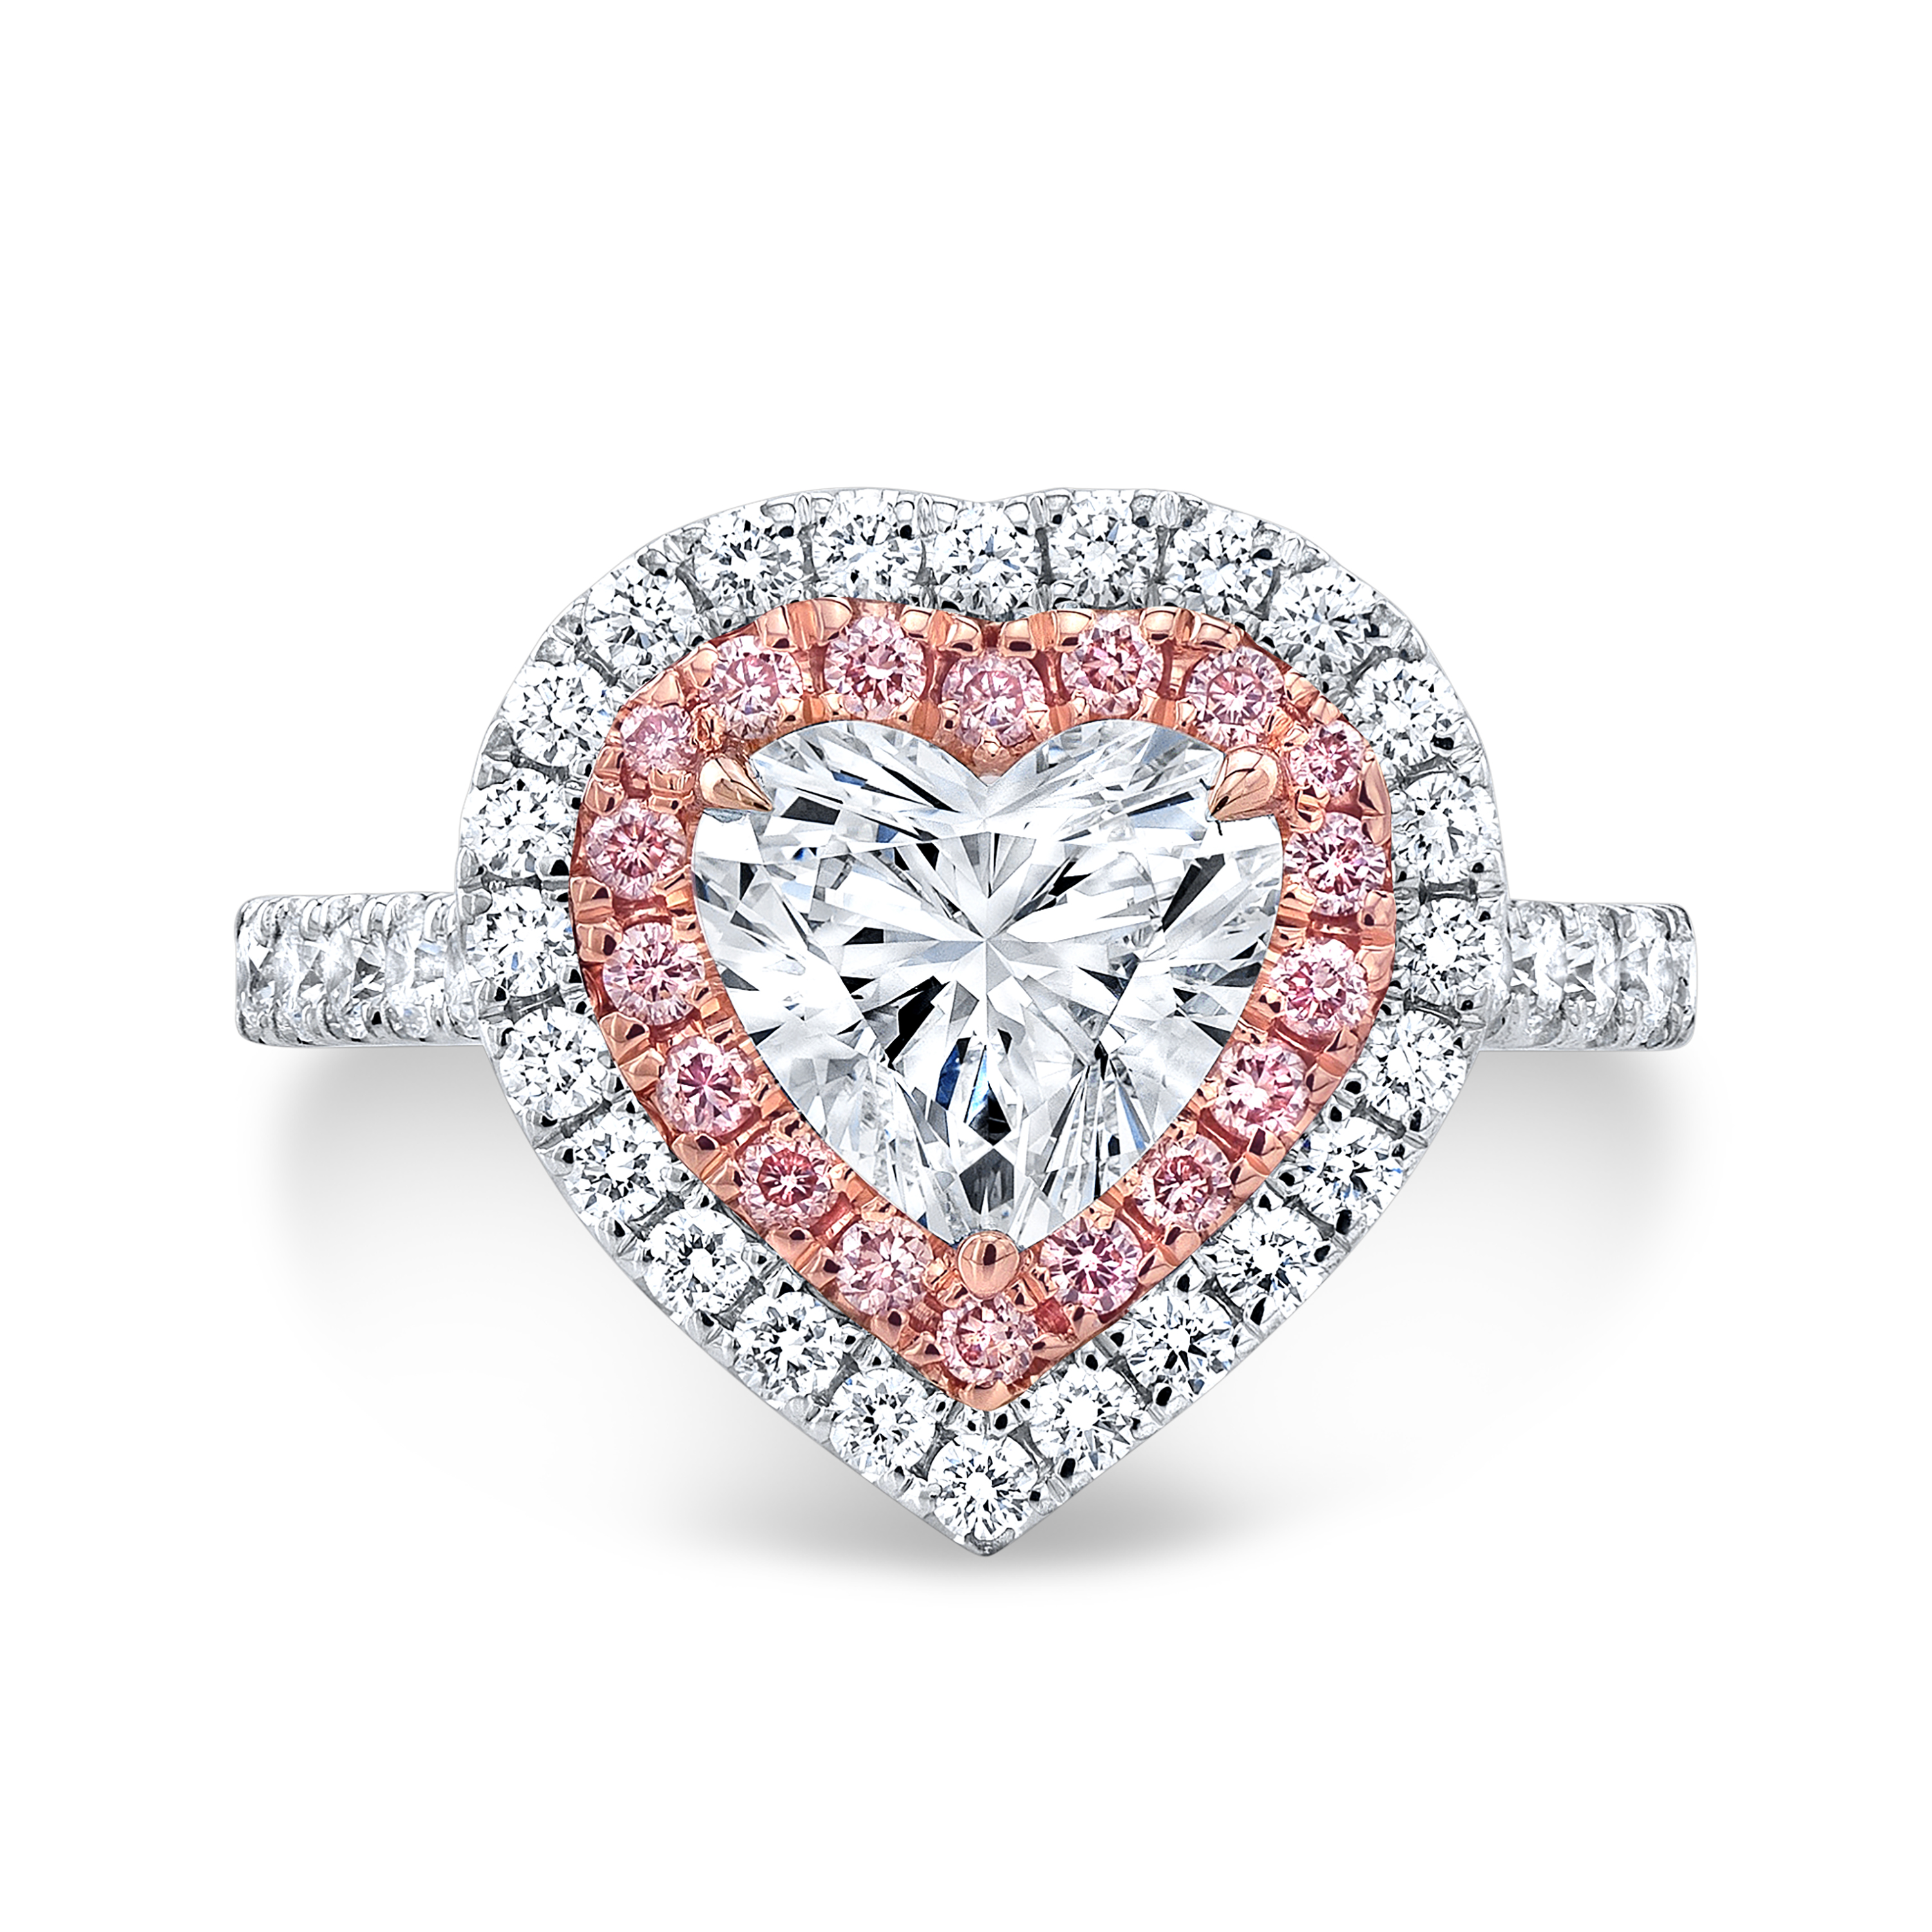 Unique Diamond Double Halo Heart w/ Pink Diamonds Engagement Ring - with A 1 ct Center Heart Shape GIA Natural Diamond in Rose Gold